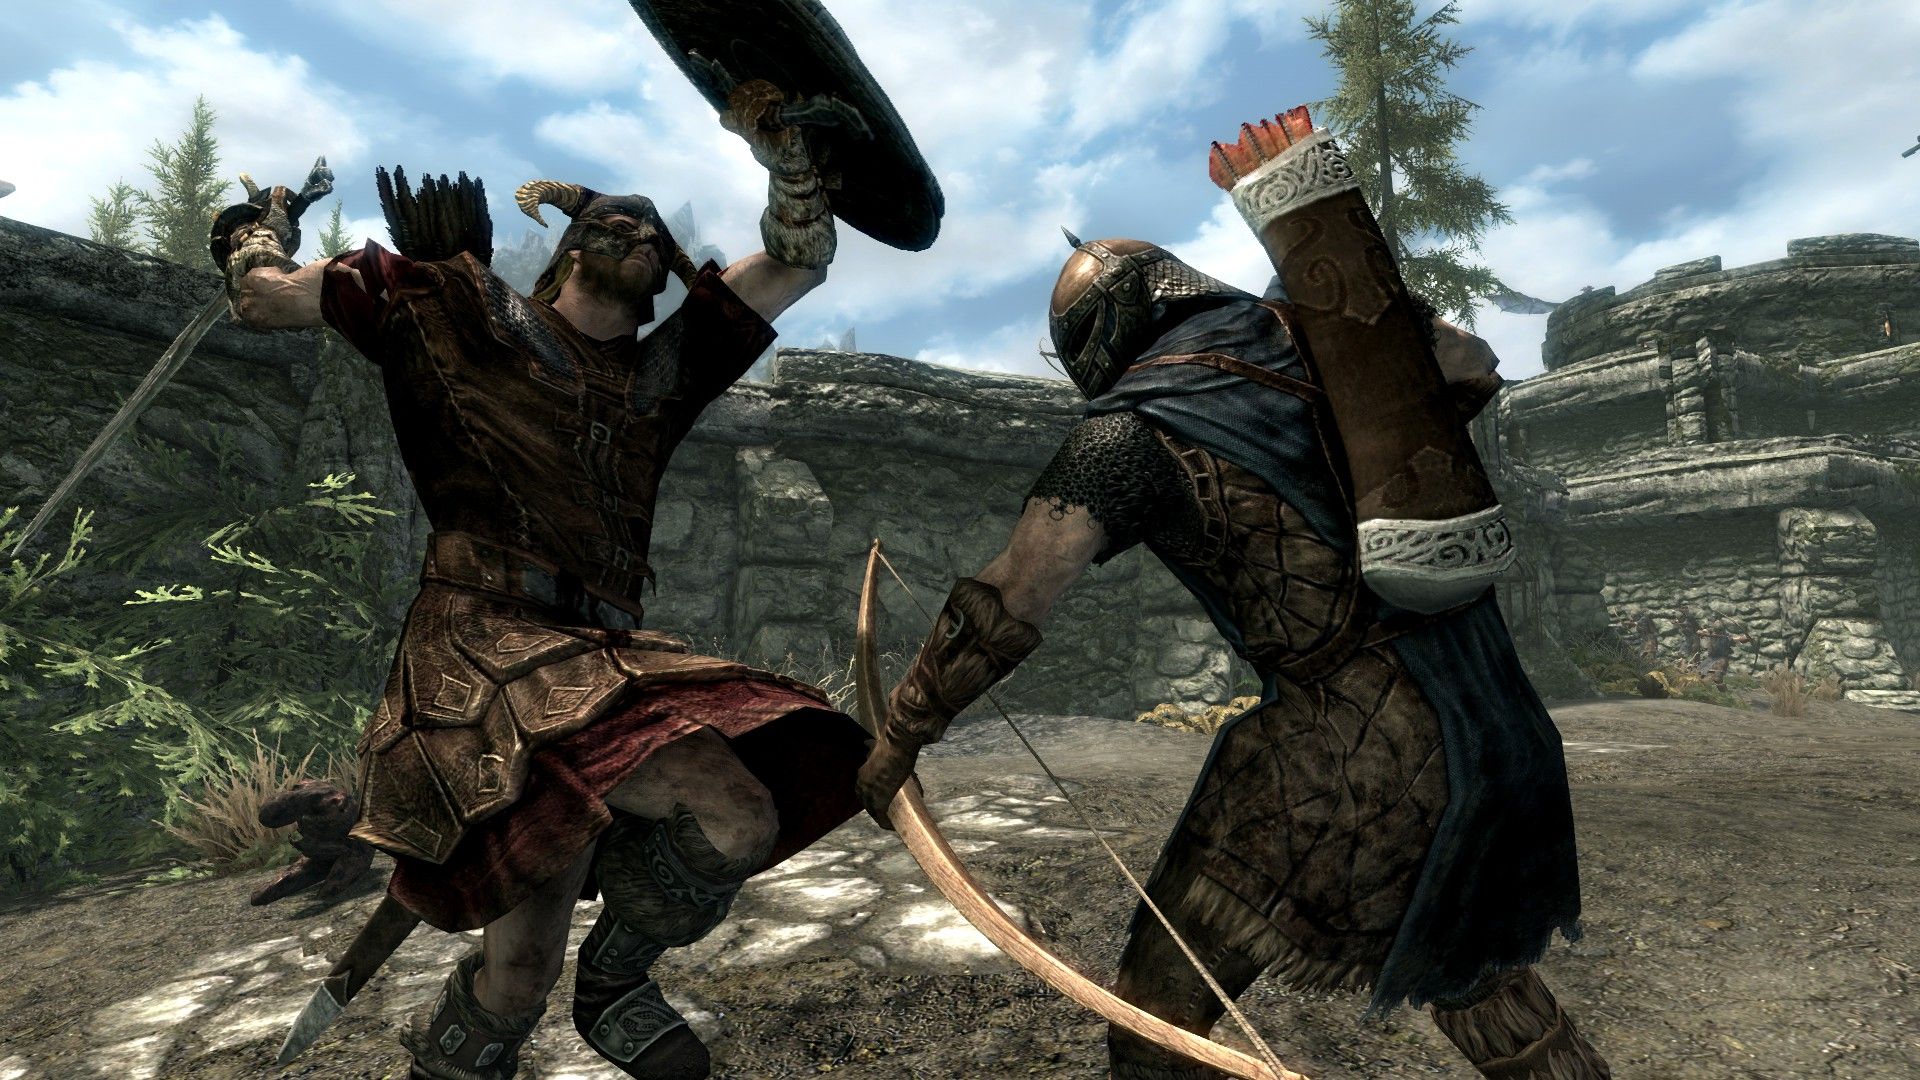 A man leaps into the air to slice an enemy archer inside a stone fortress